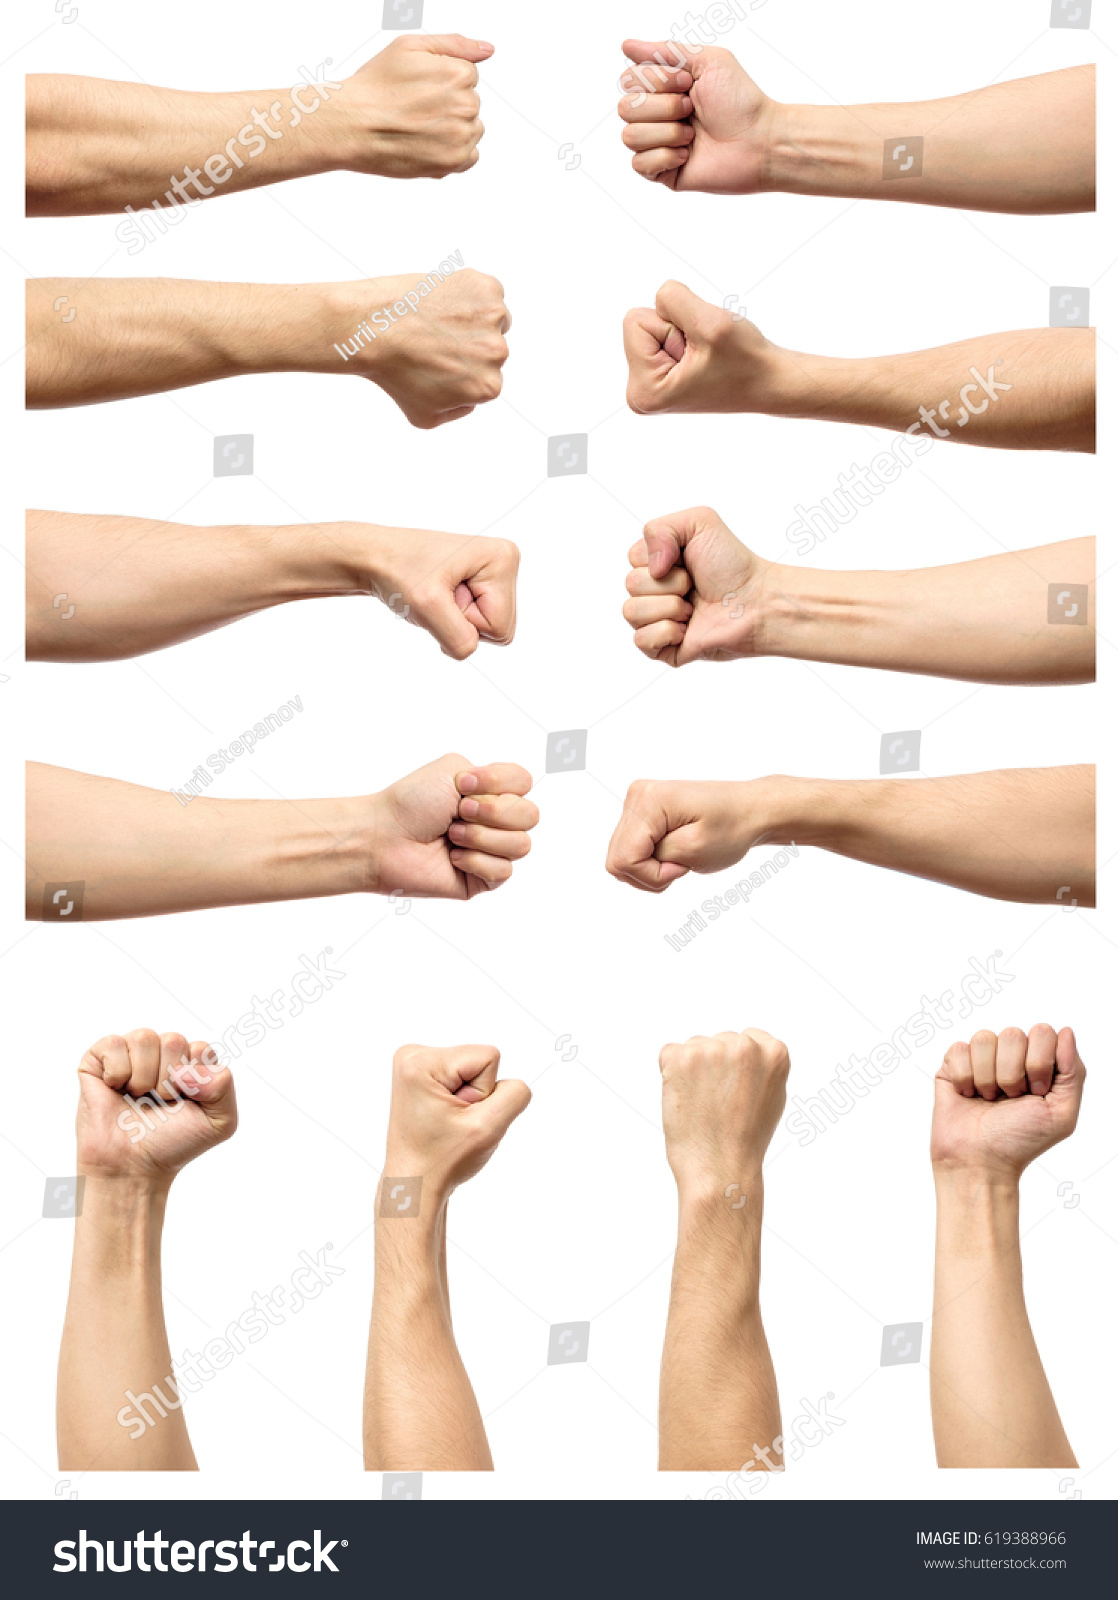 Set of male's fist isolated on white background #619388966